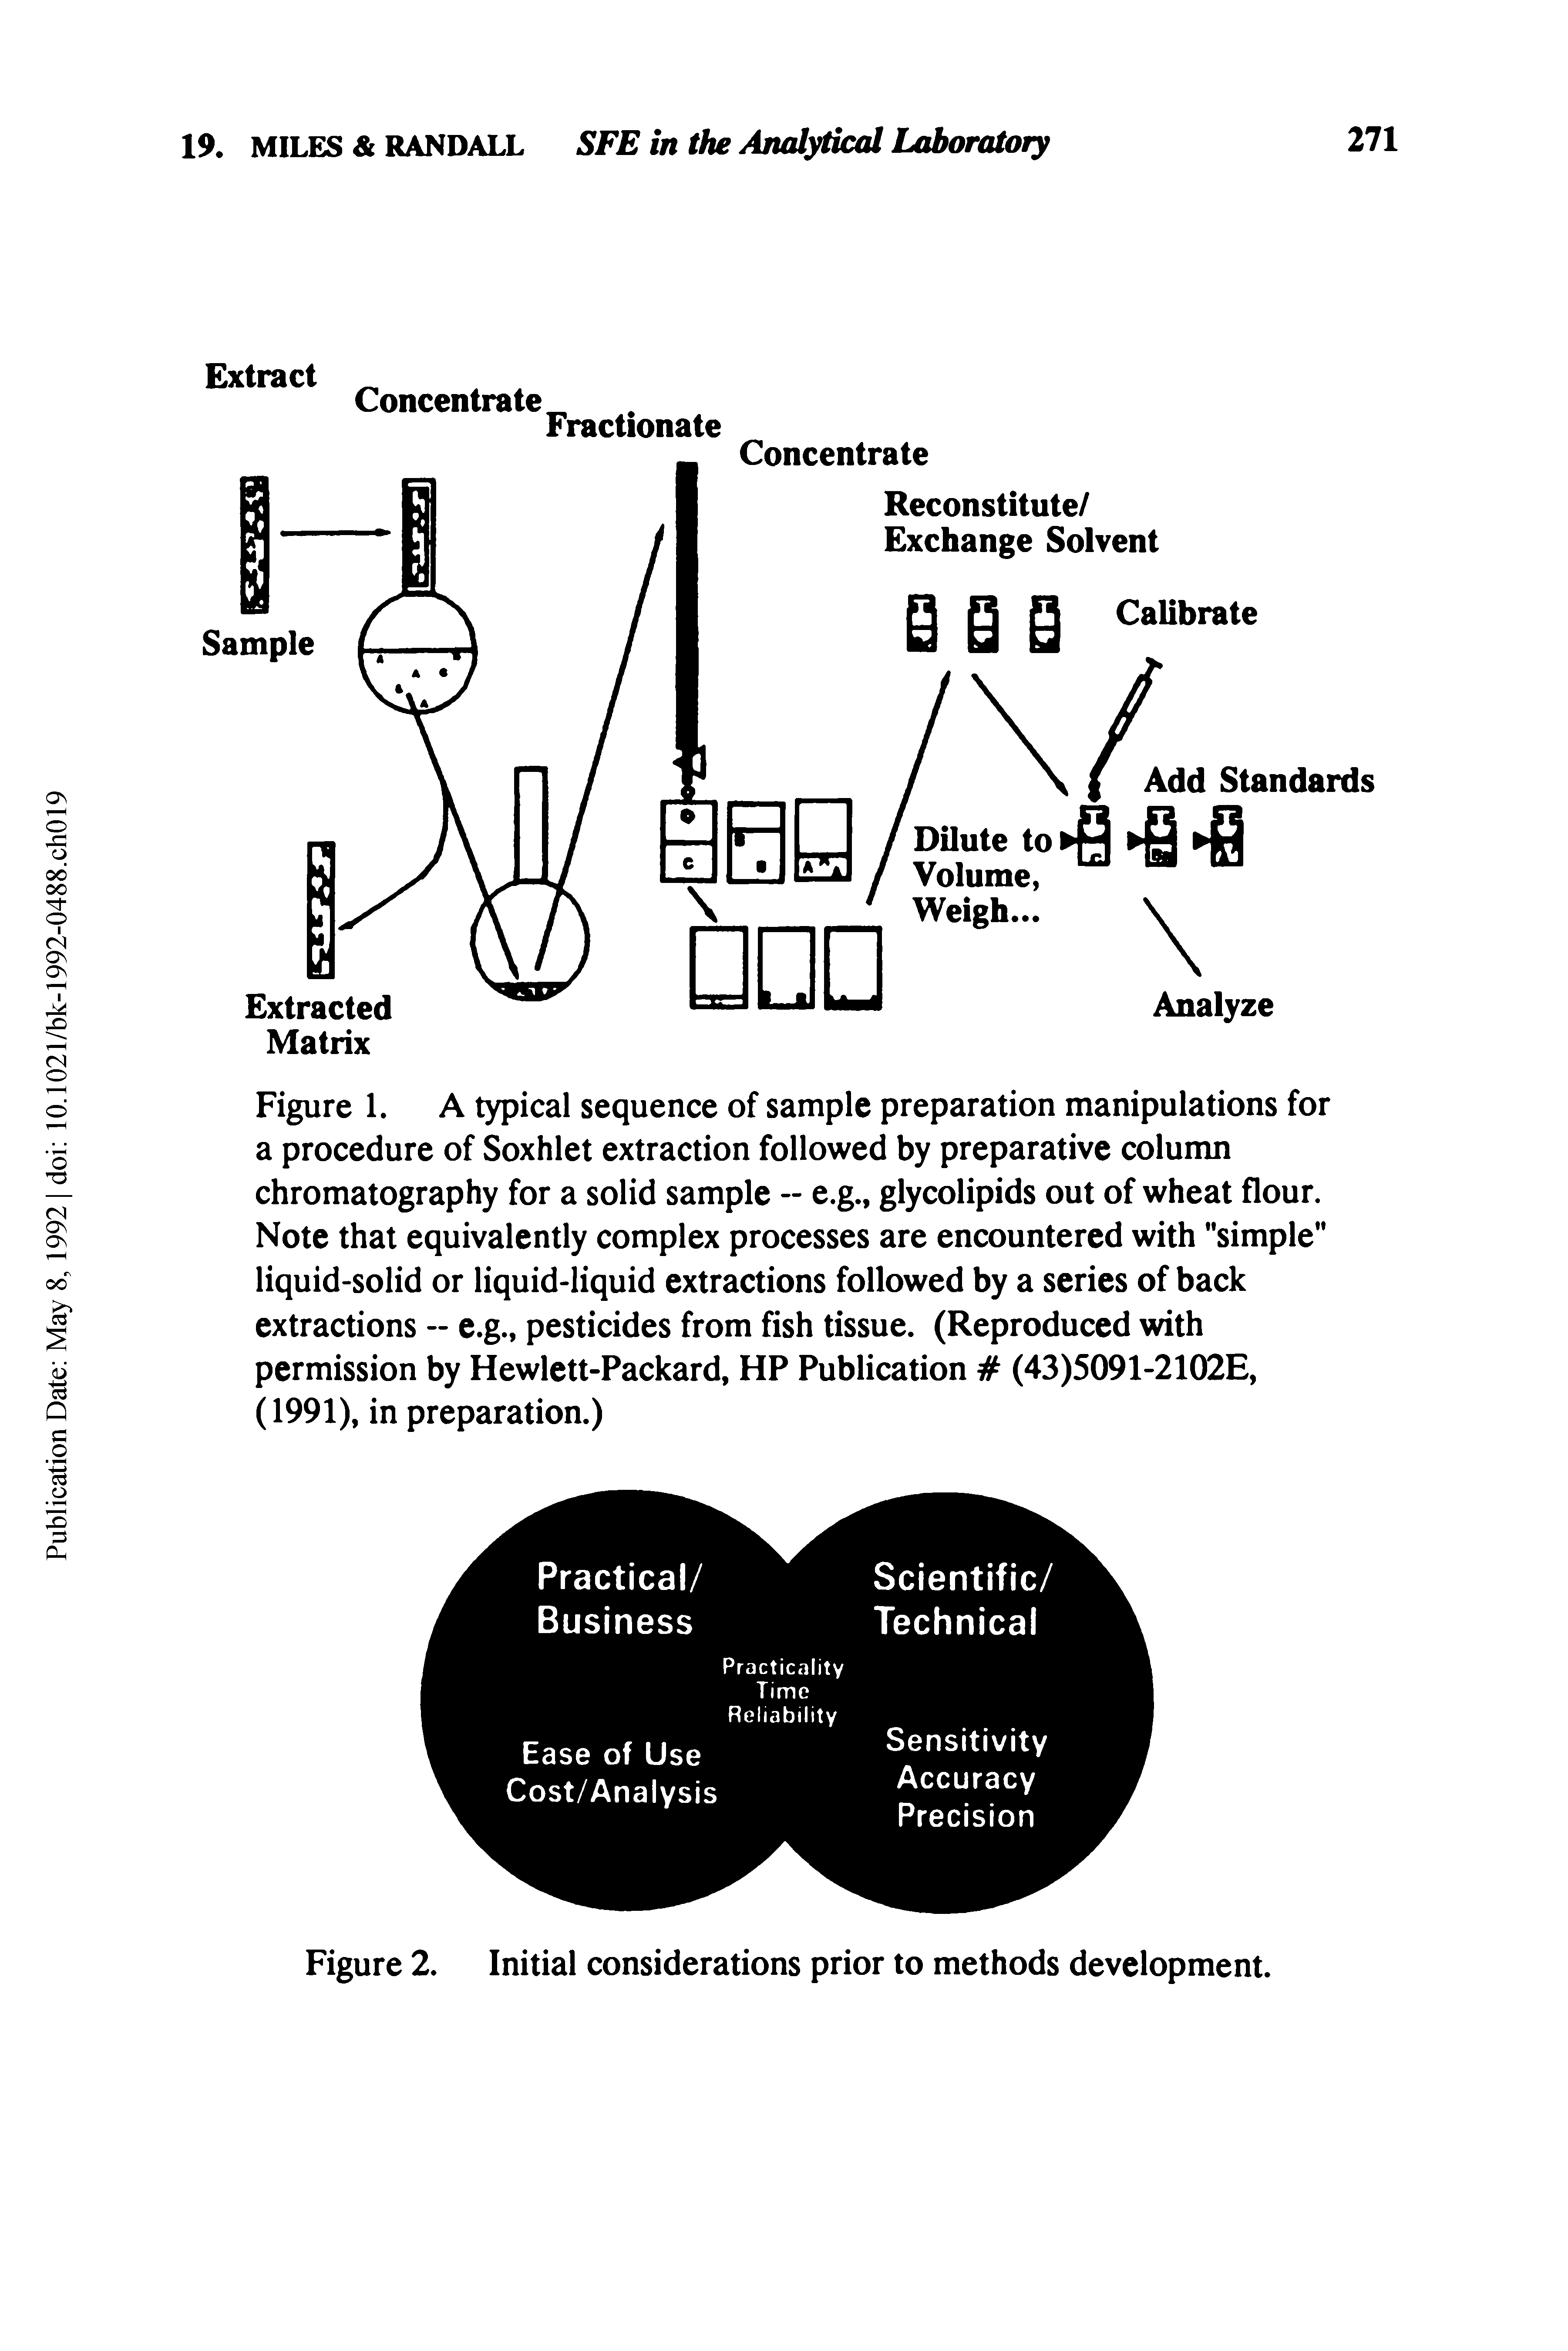 Figure 1. A typical sequence of sample preparation manipulations for a procedure of Soxhlet extraction followed by preparative column chromatography for a solid sample - e.g., glycolipids out of wheat flour. Note that equivalently complex processes are encountered with "simple liquid-solid or liquid-liquid extractions followed by a series of back extractions - e.g., pesticides from fish tissue. (Reproduced with permission by Hewlett-Packard, HP Publication (43)5091-2102E, (1991), in preparation.)...